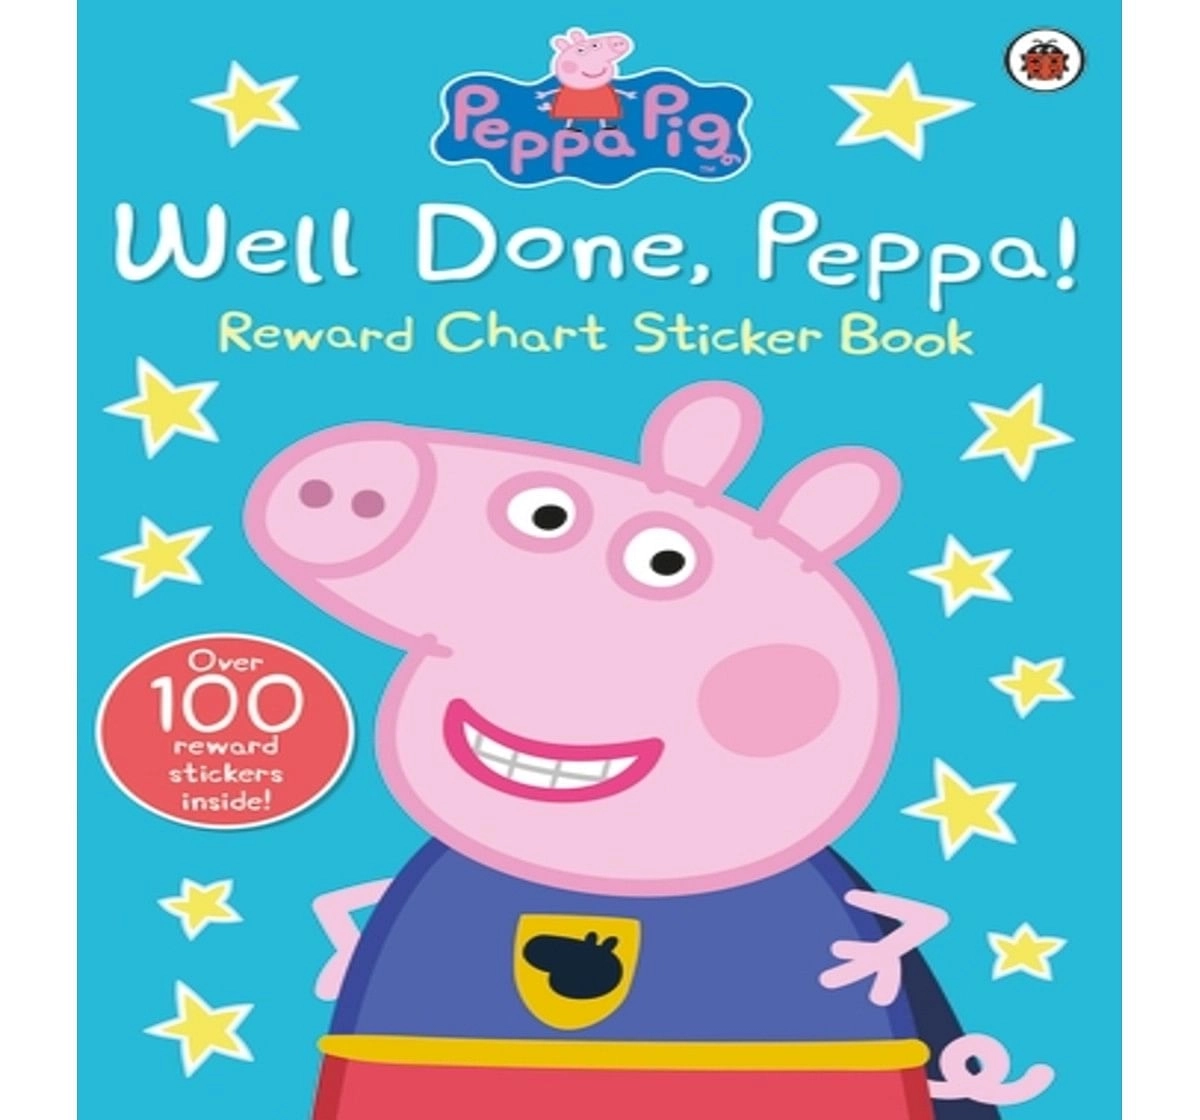 Well Done, Peppa!, 16 Pages Book by Ladybird, Paperback